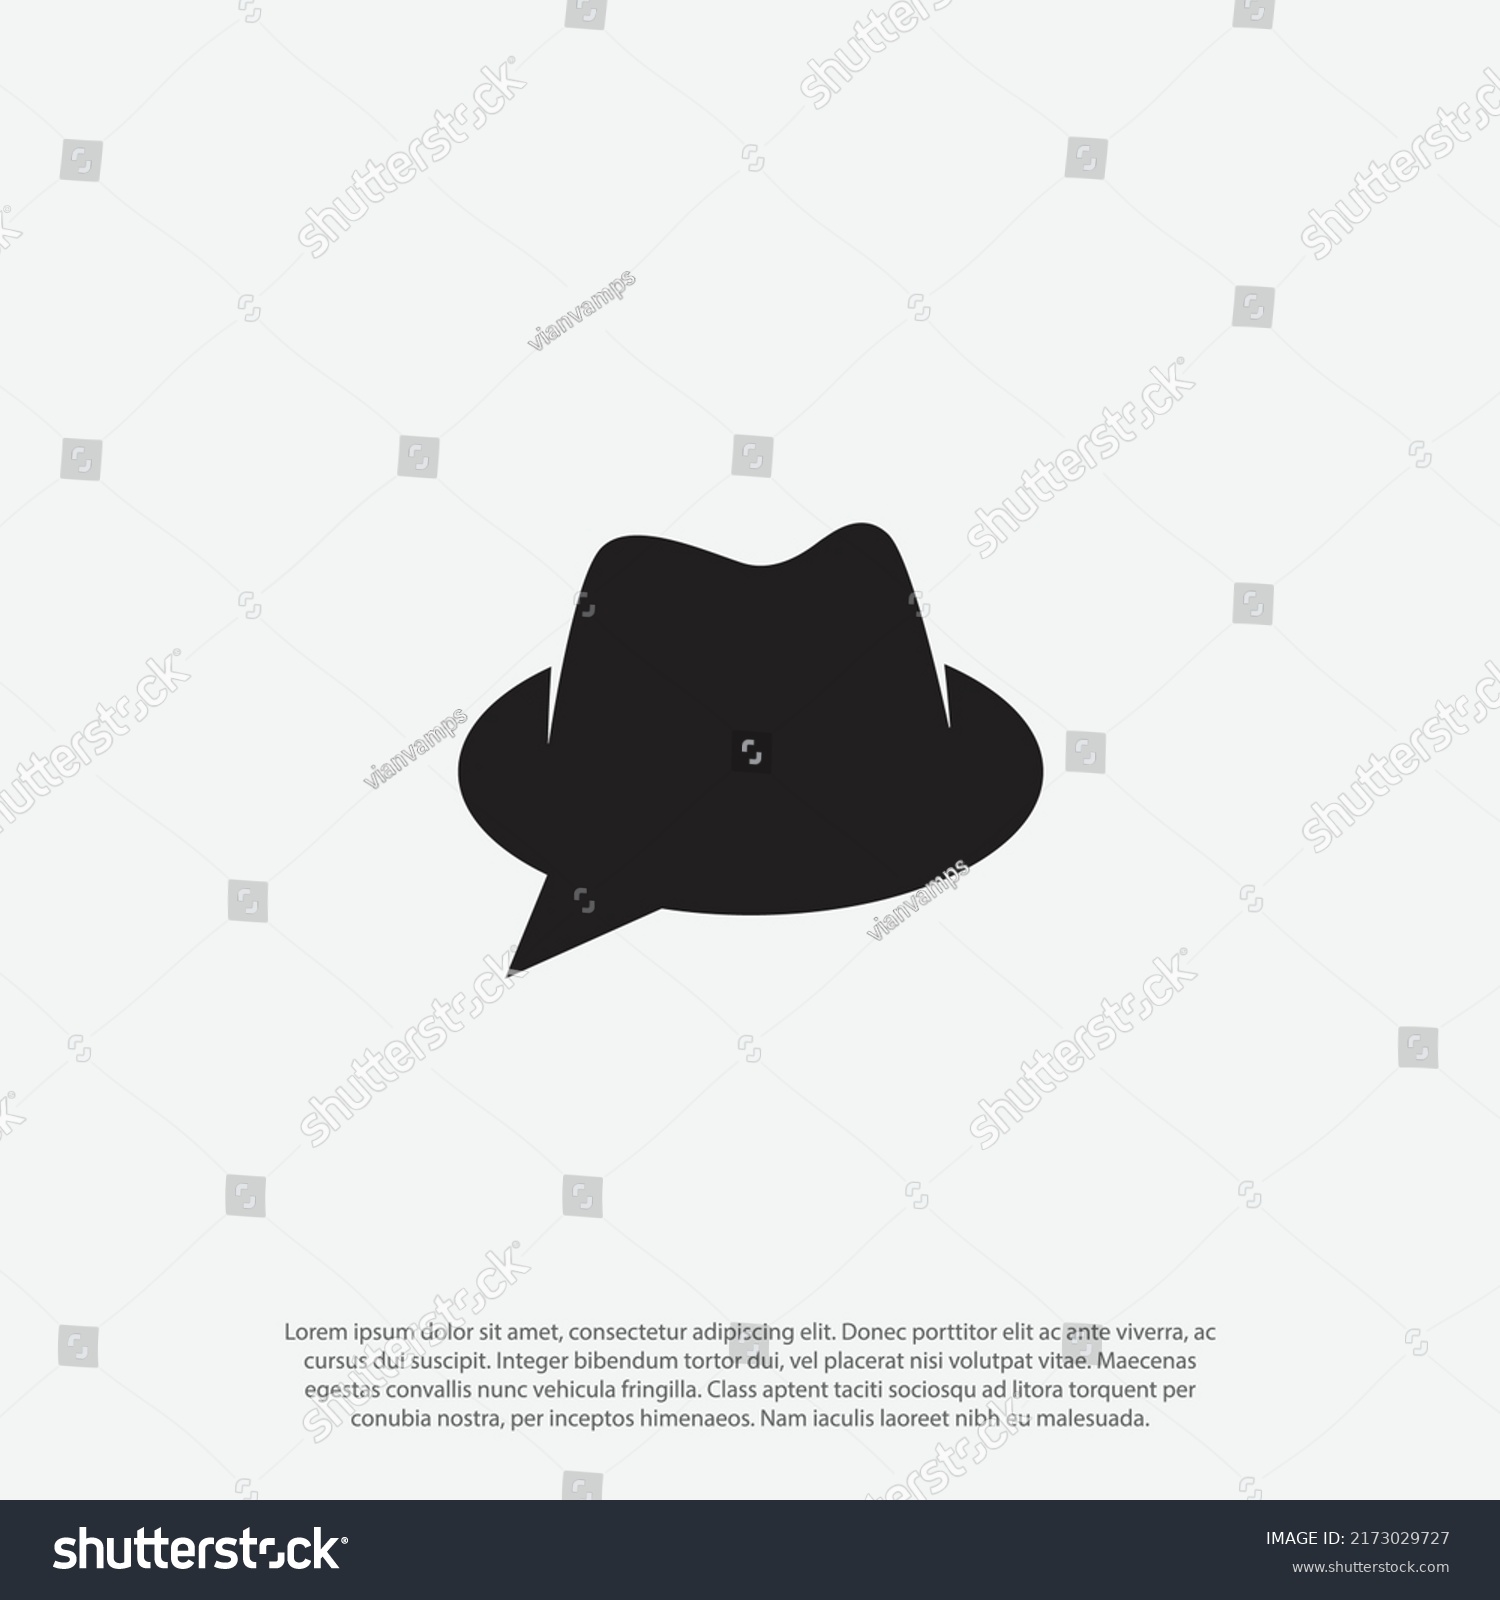 SVG of Combining bubble chat and spy detective hats or hat for private chat logo vector svg